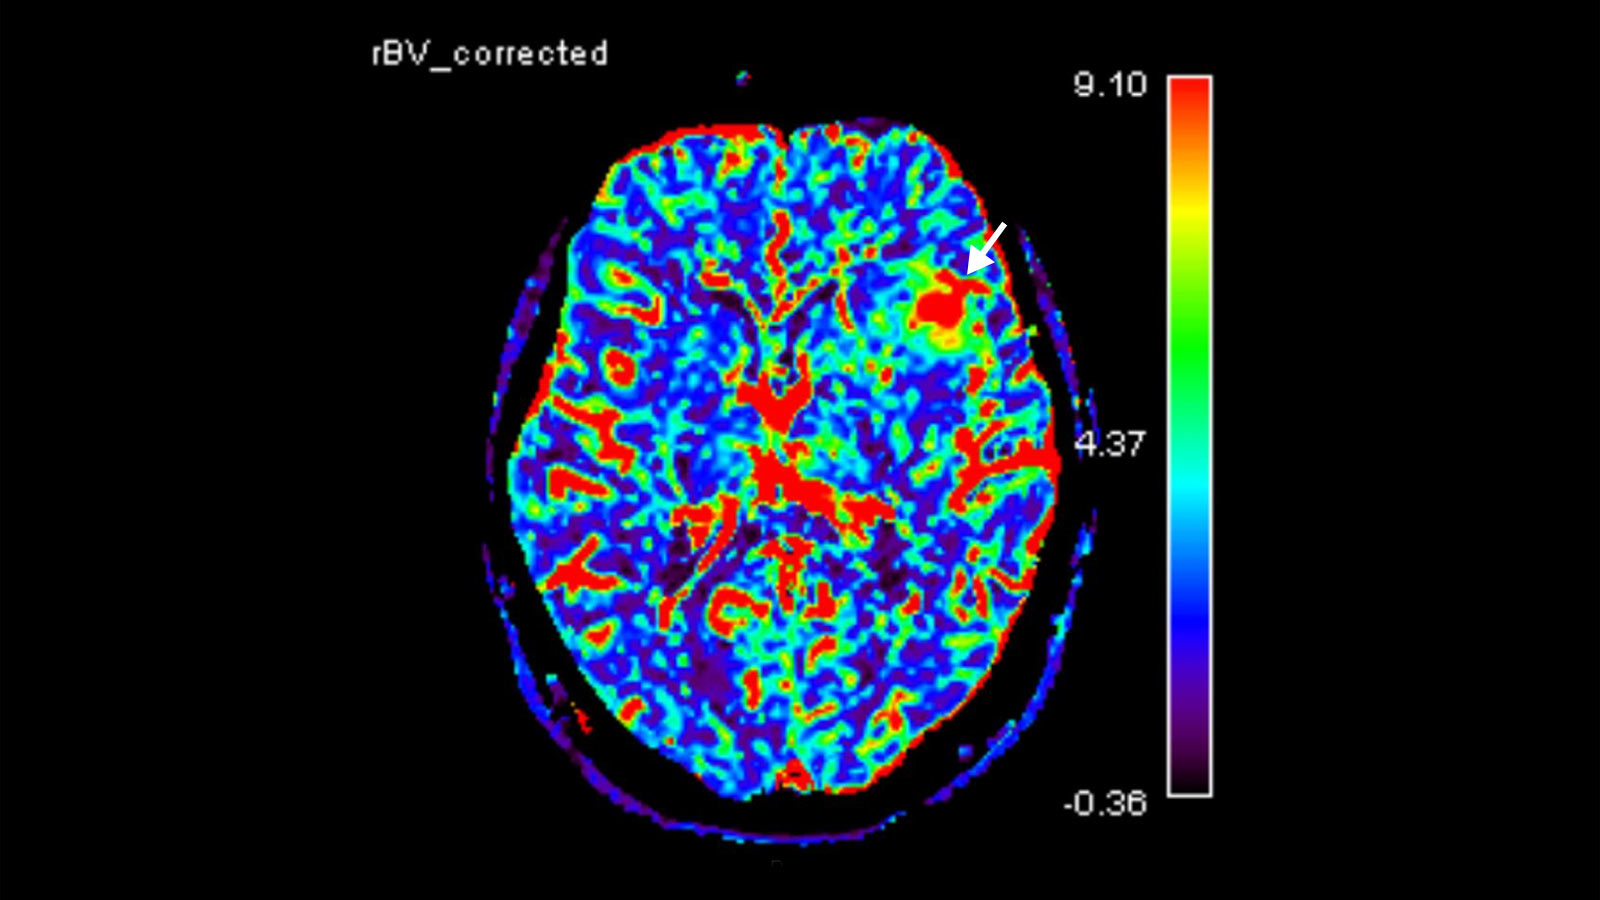 MRI with perfusion sequence shows the blood flow of the brain in colors. In the area of the tumor, an increased blood volume can be seen in color.